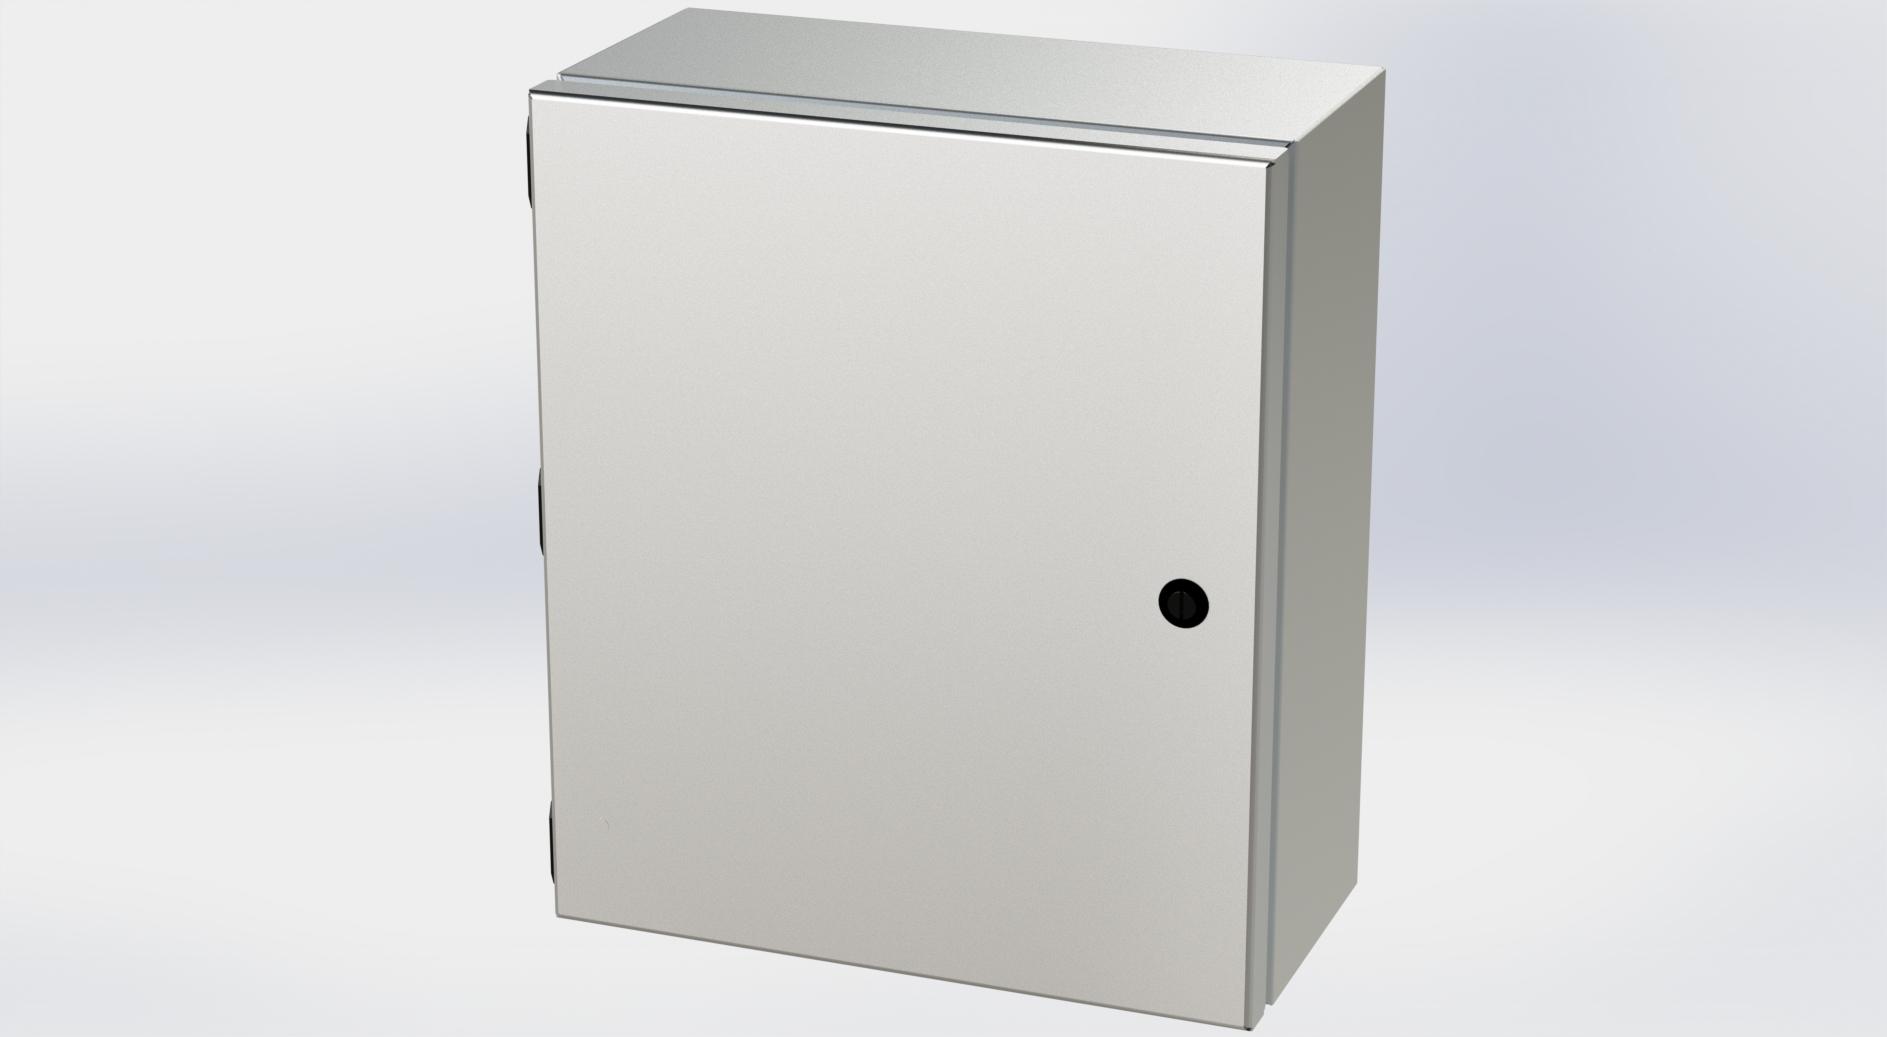 Saginaw Control SCE-1412ELJSS S.S. ELJ Enclosure, Height:14.00", Width:12.00", Depth:6.00", #4 brushed finish on all exterior surfaces. Optional sub-panels are powder coated white.